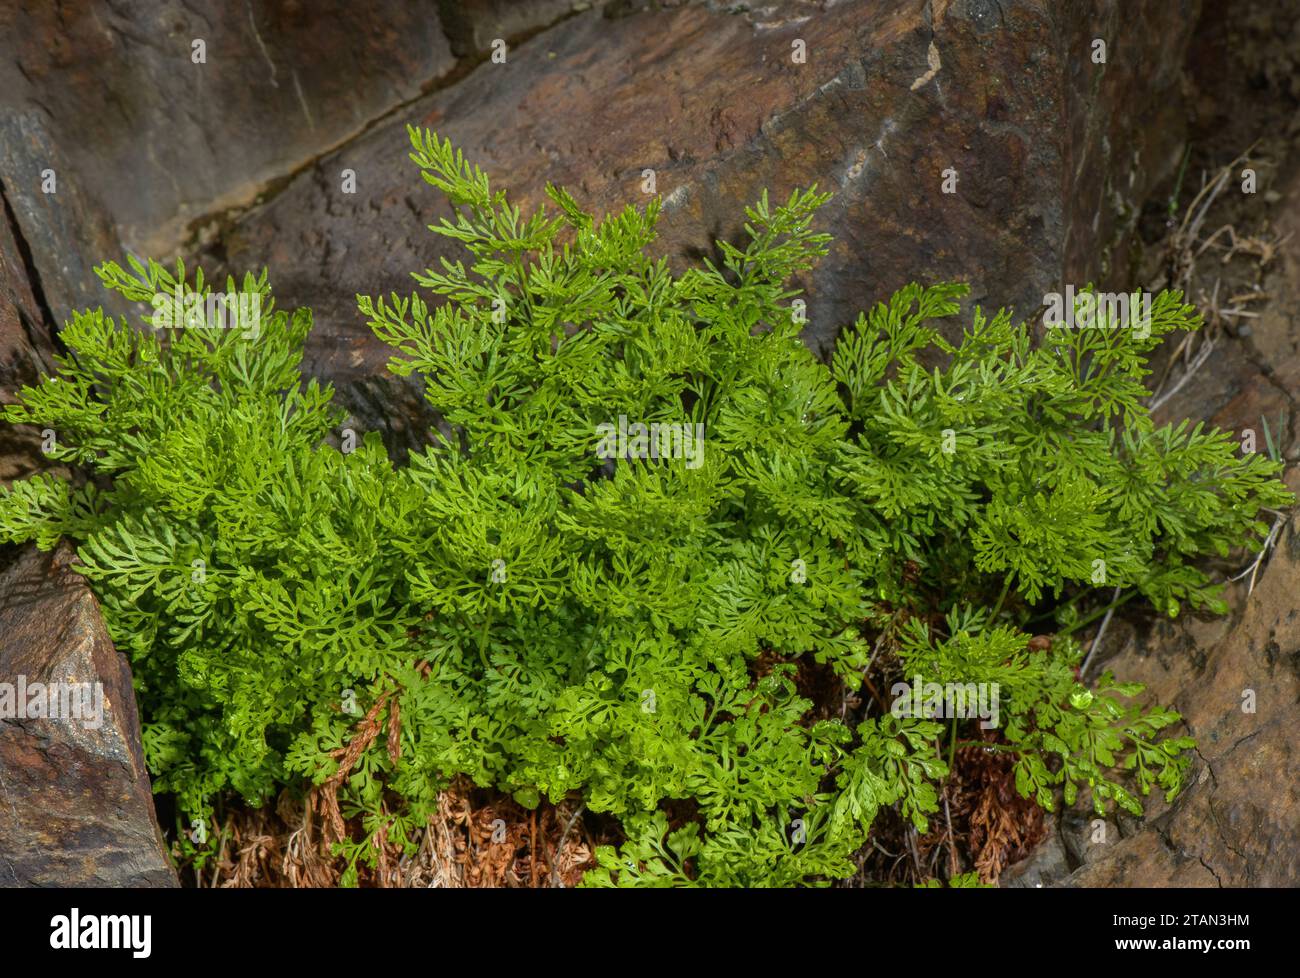 Parsley Fern, Cryptogramma crispa with fertile and sterile fronds. Stock Photo